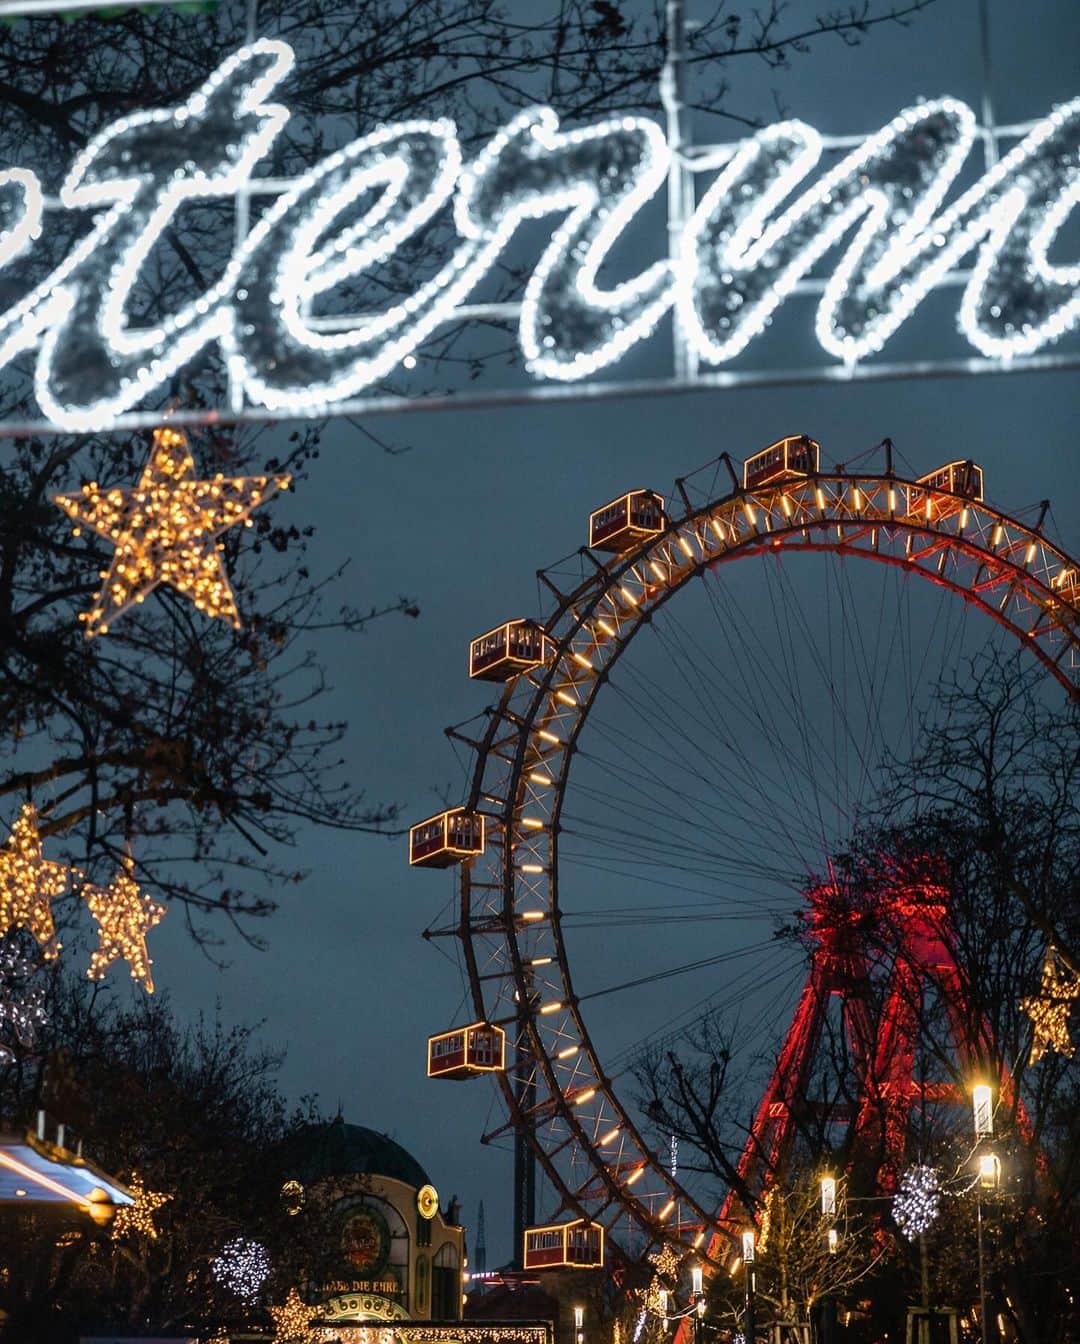 Wien | Viennaのインスタグラム：「Have you ever taken a ride with the Giant Ferris Wheel? 🎡✨  It has been turning its rounds since 1897 and is one of Vienna’s most popular attractions!  Starting on November 18, you’ll find a cute winter Xmas market right in front of it. 🎄   #giantferriswheel #ferriswheel #wienerriesenrad #riesenrad #vienna #wien #viennastravel #winterinvienna #viennatrip #viennanow #feelaustria #austria #sightseeing #christmasmarket #xmasmarket #christmasmarketvienna #europe #christmasineurope」